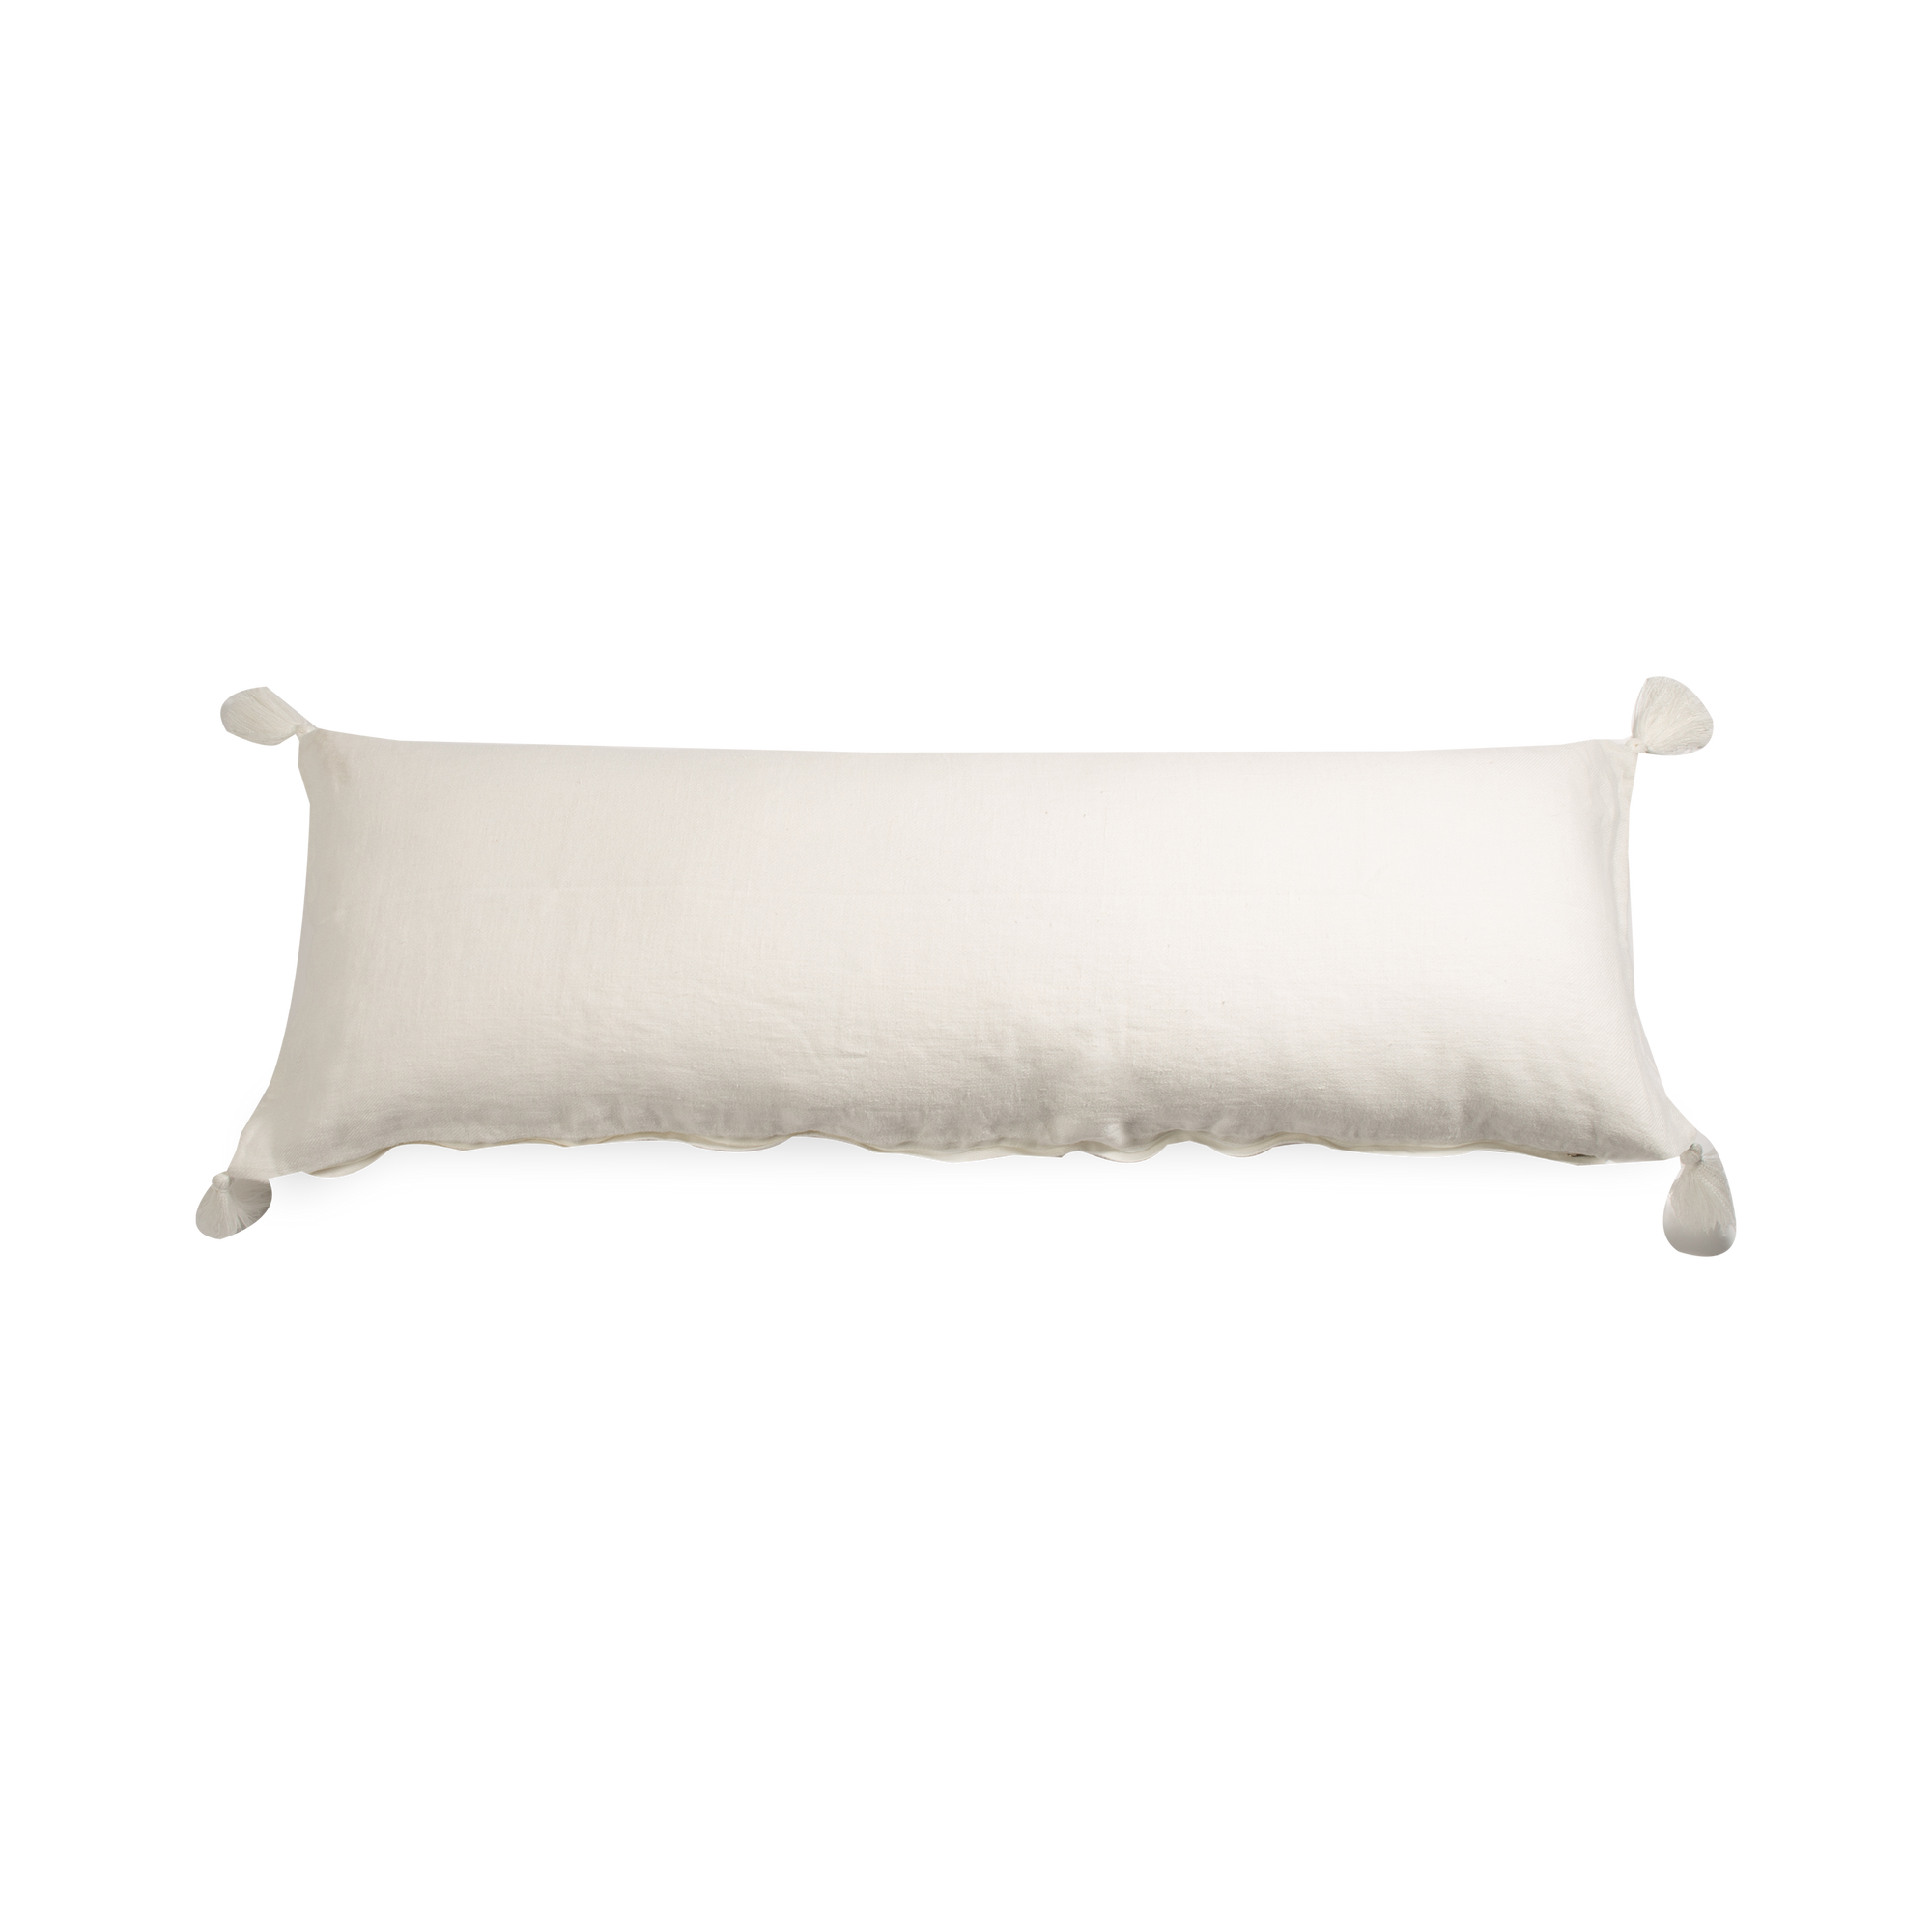 This pillow features a stone-washed linen cover in white and a tassel in each corner.